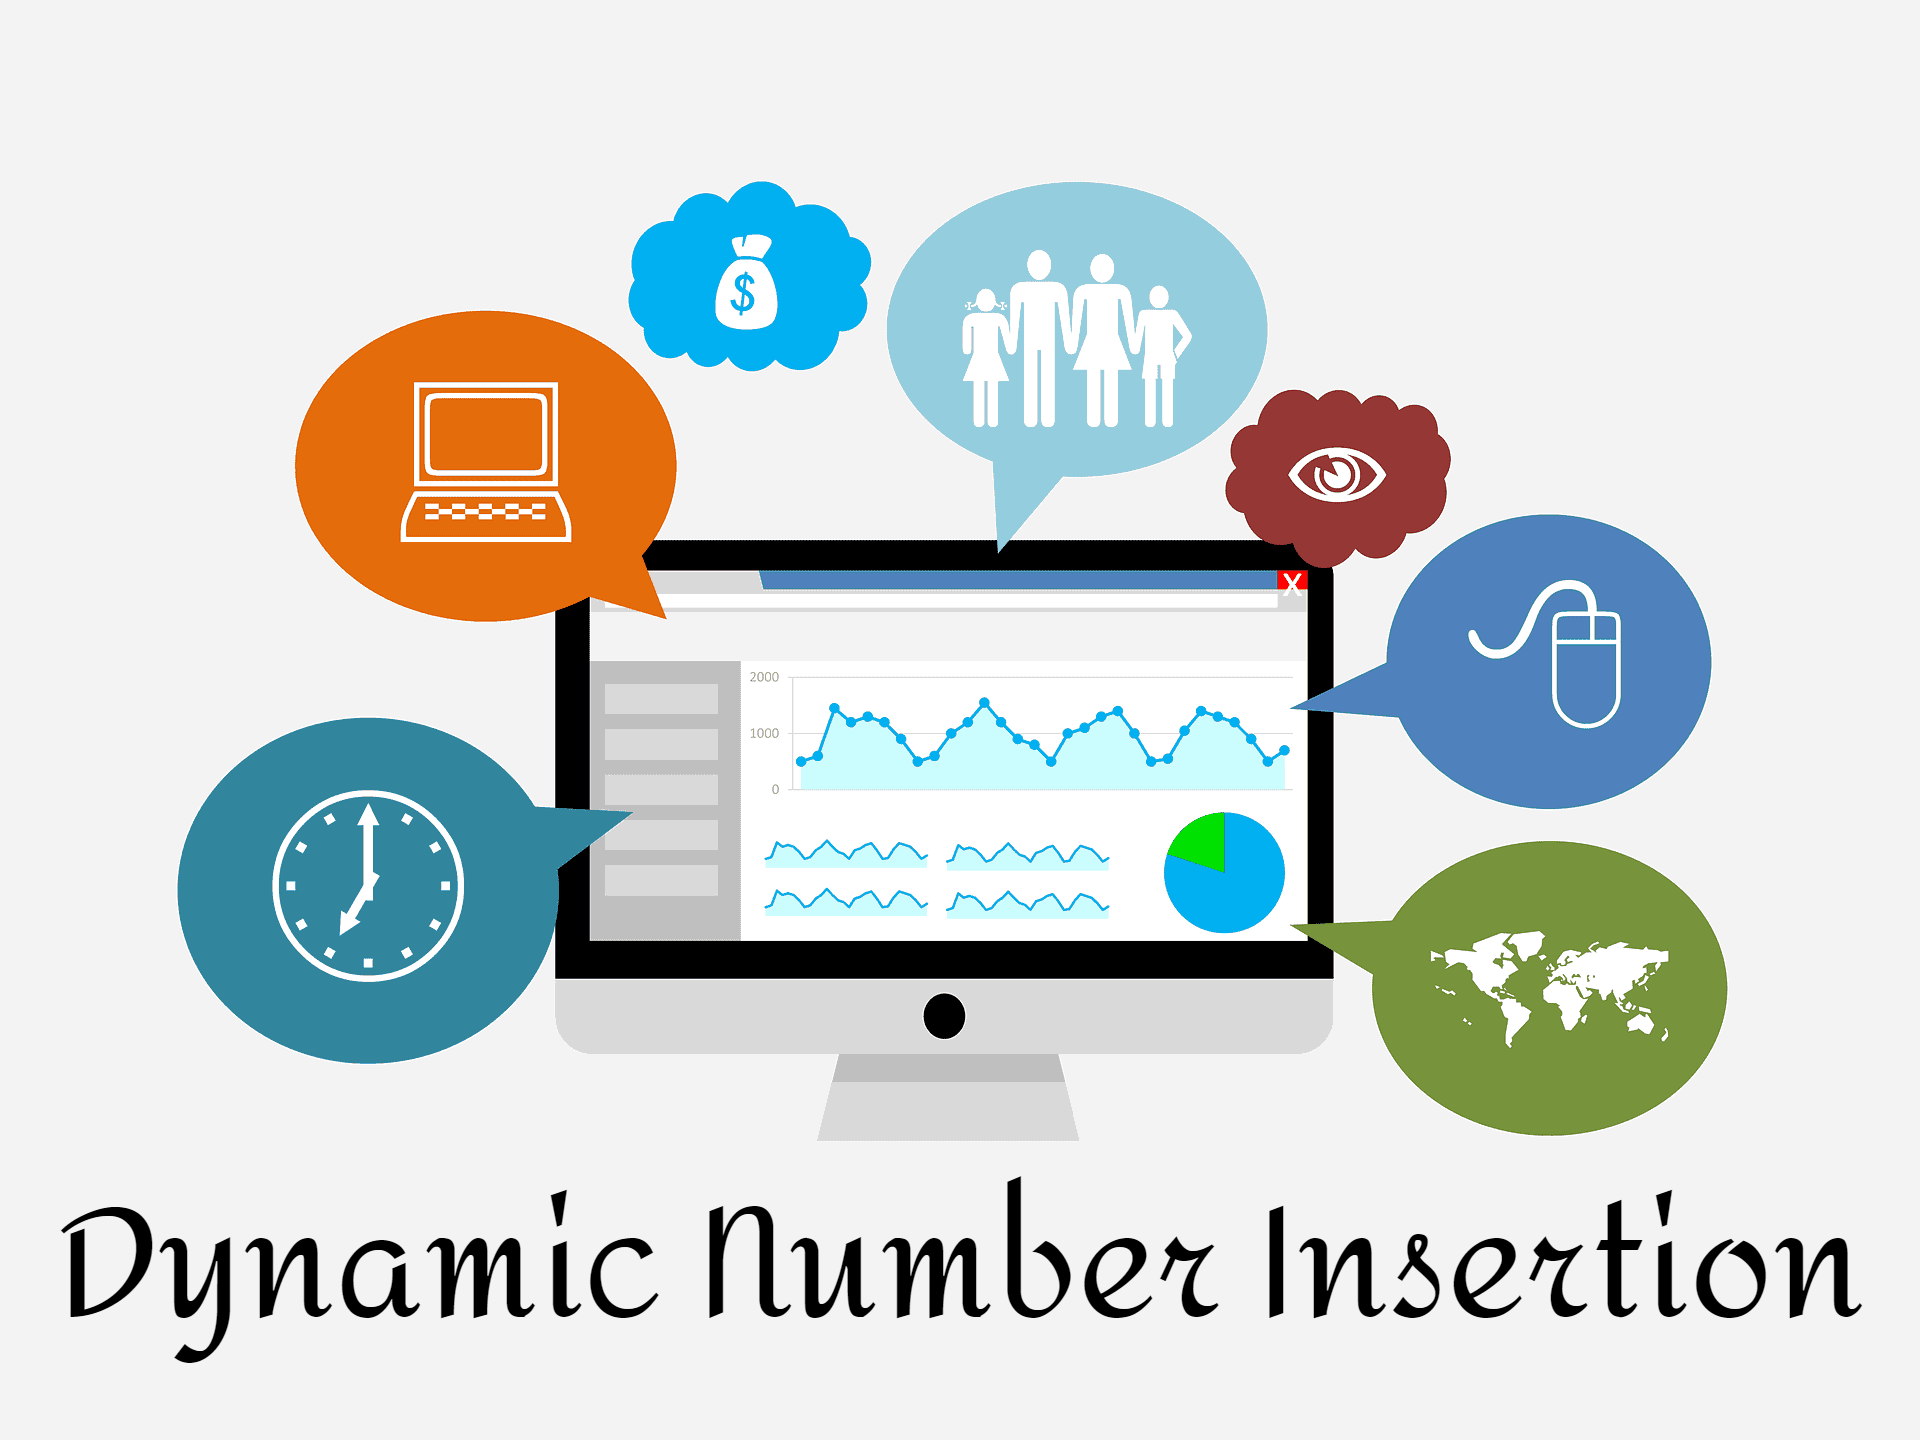 What Is Dynamic Number Insertion And How Does It Work?